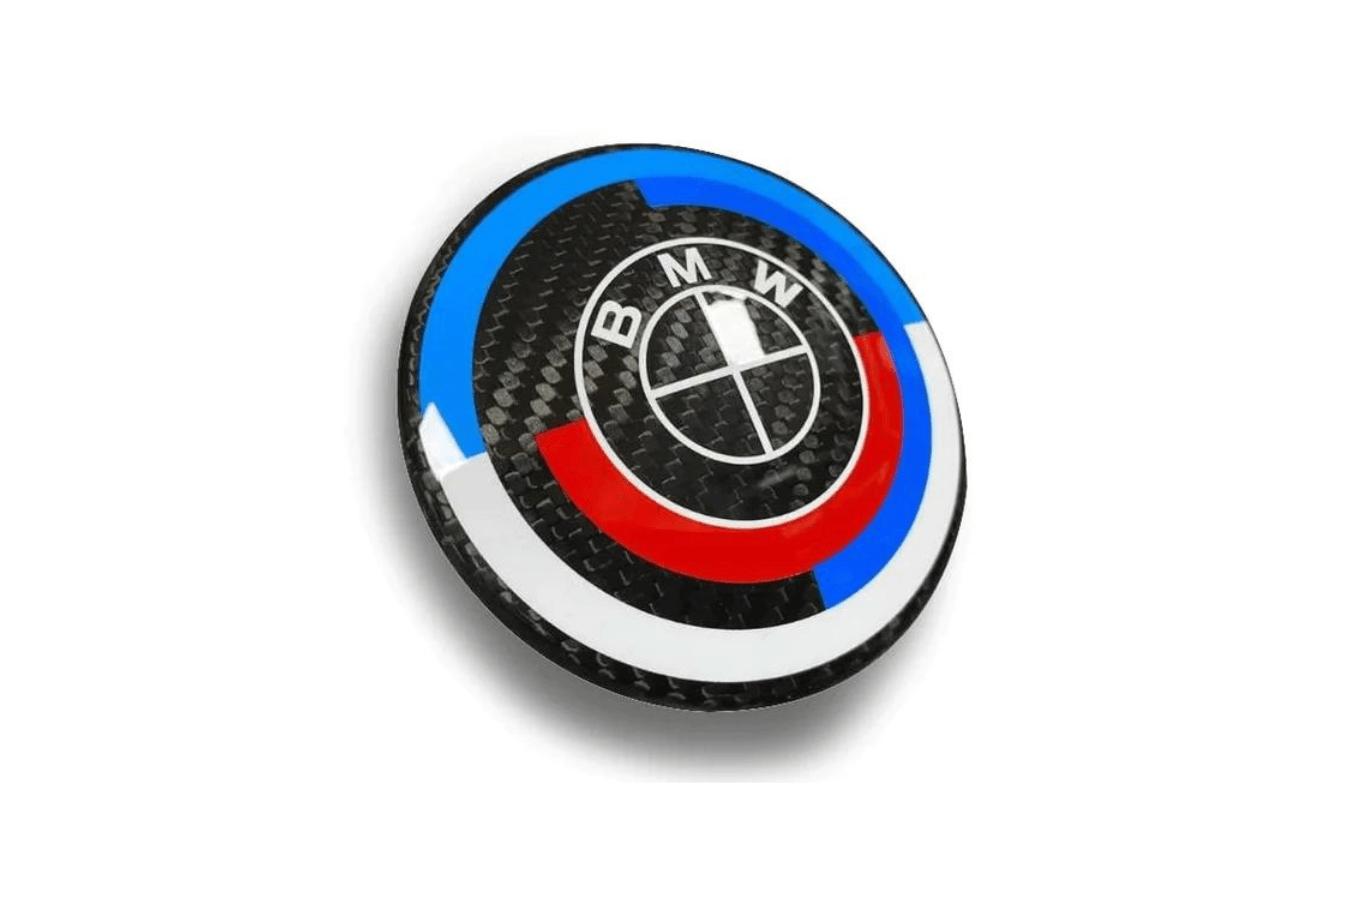 BMW Roundel Emblems - Full Carbon Black and White Style